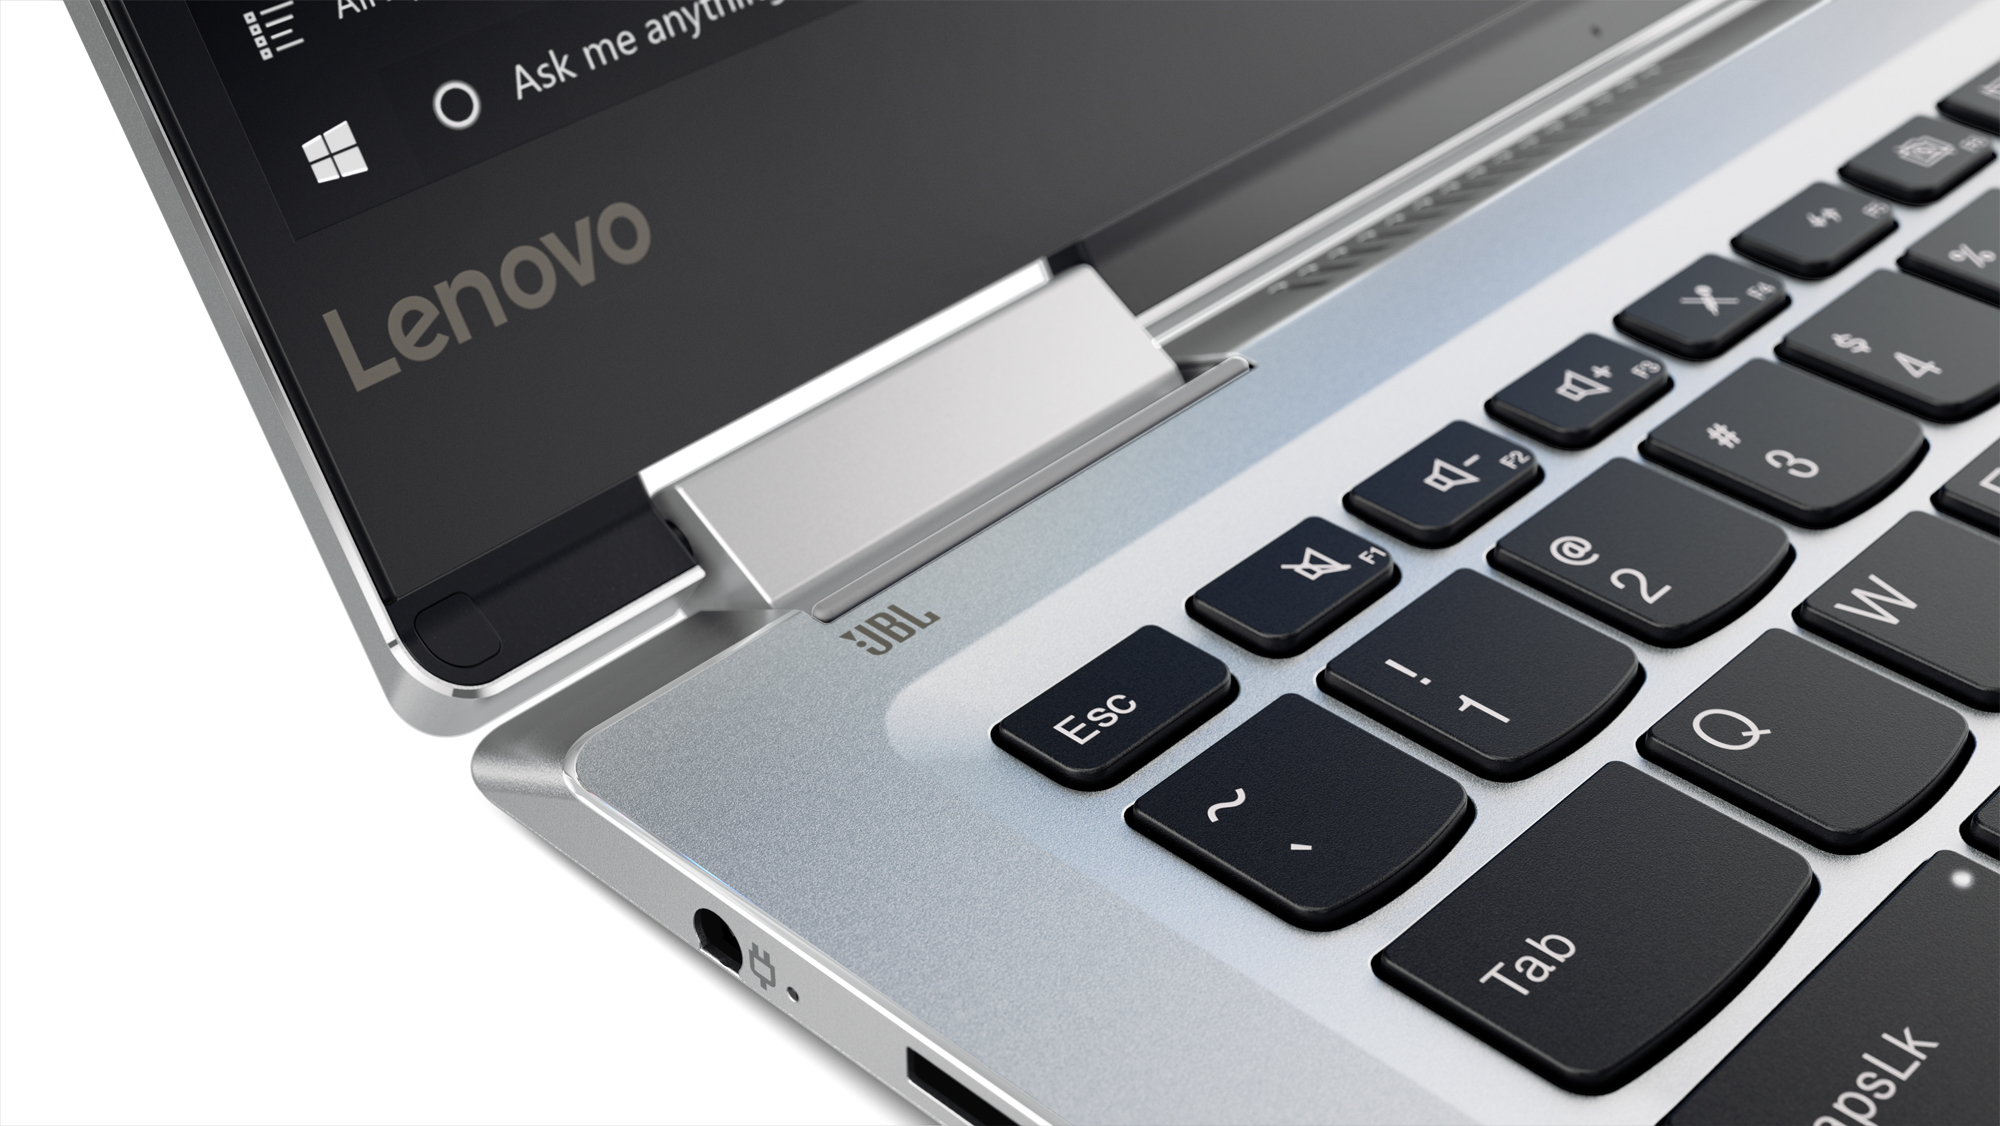 The Lenovo YOGA 710 is a powerful convertible laptop, powered by Windows 10.